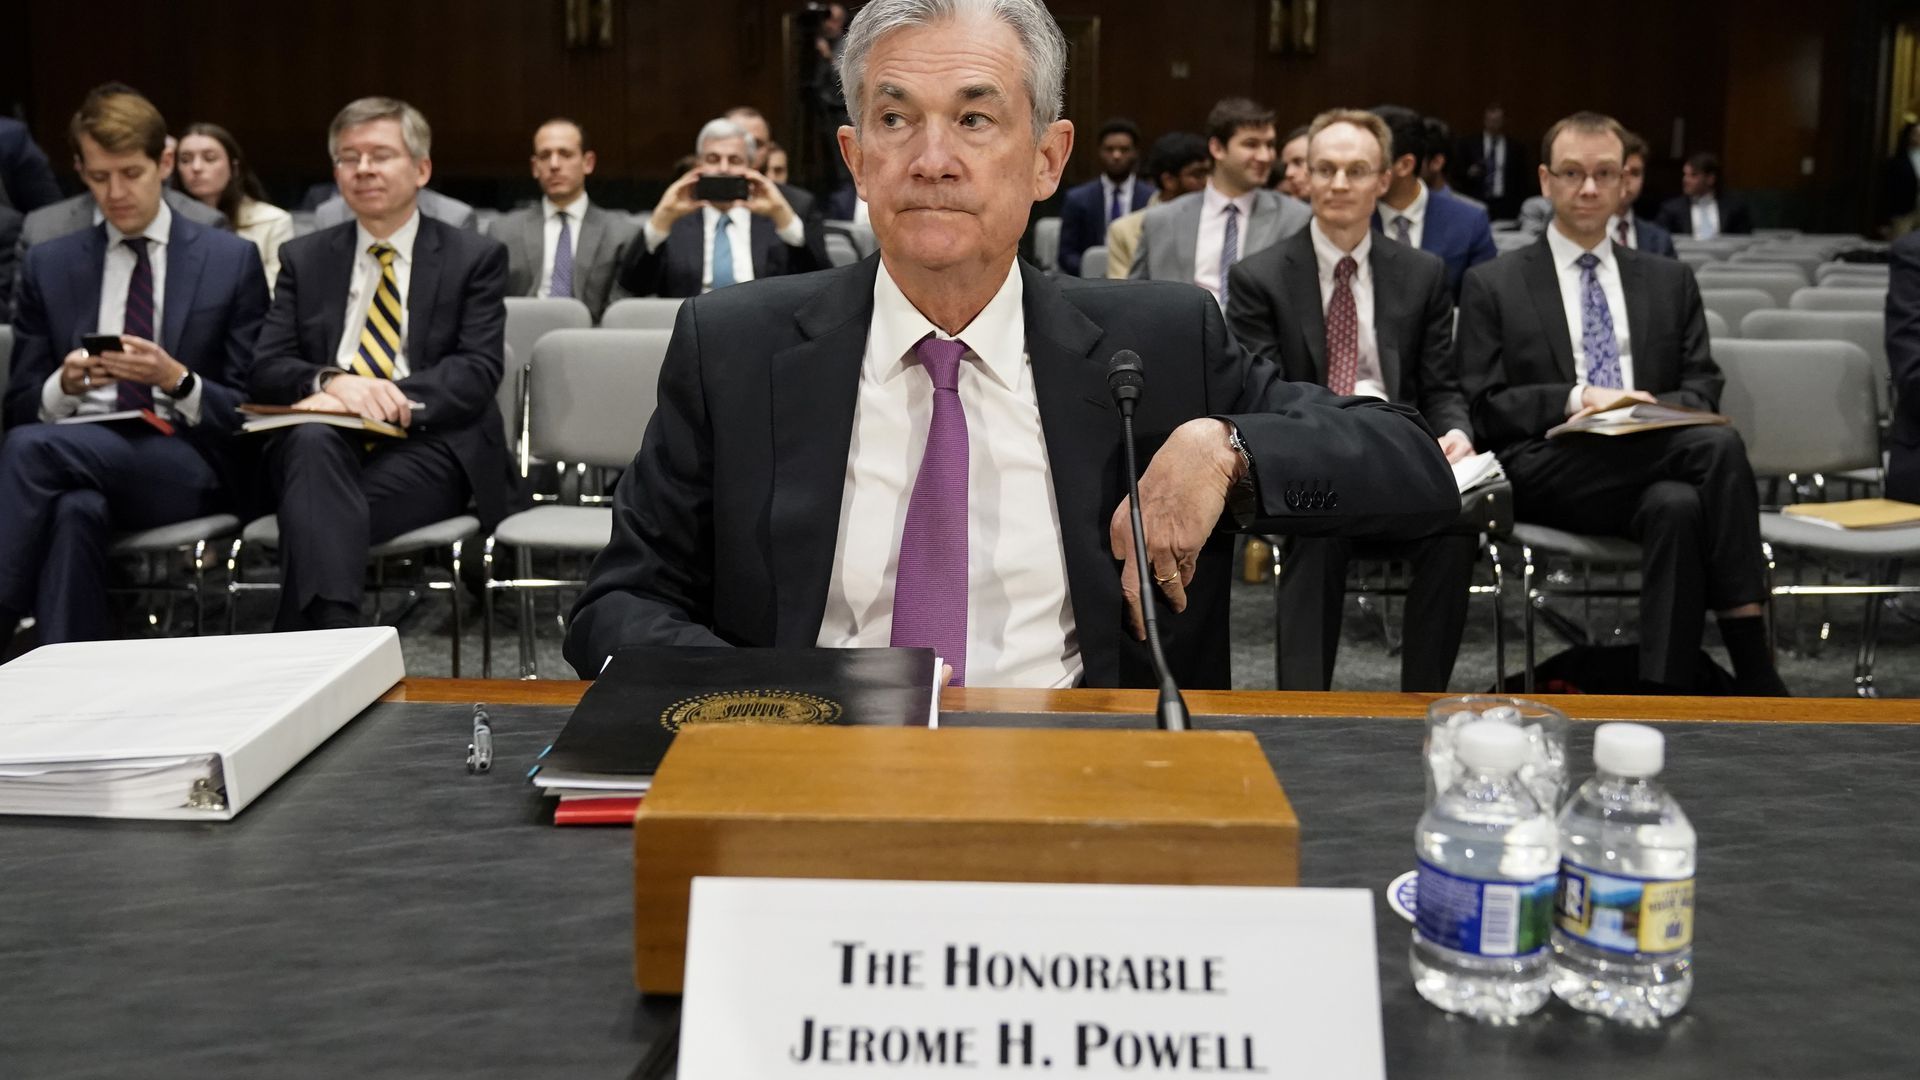 Jerome Powell in front of congress